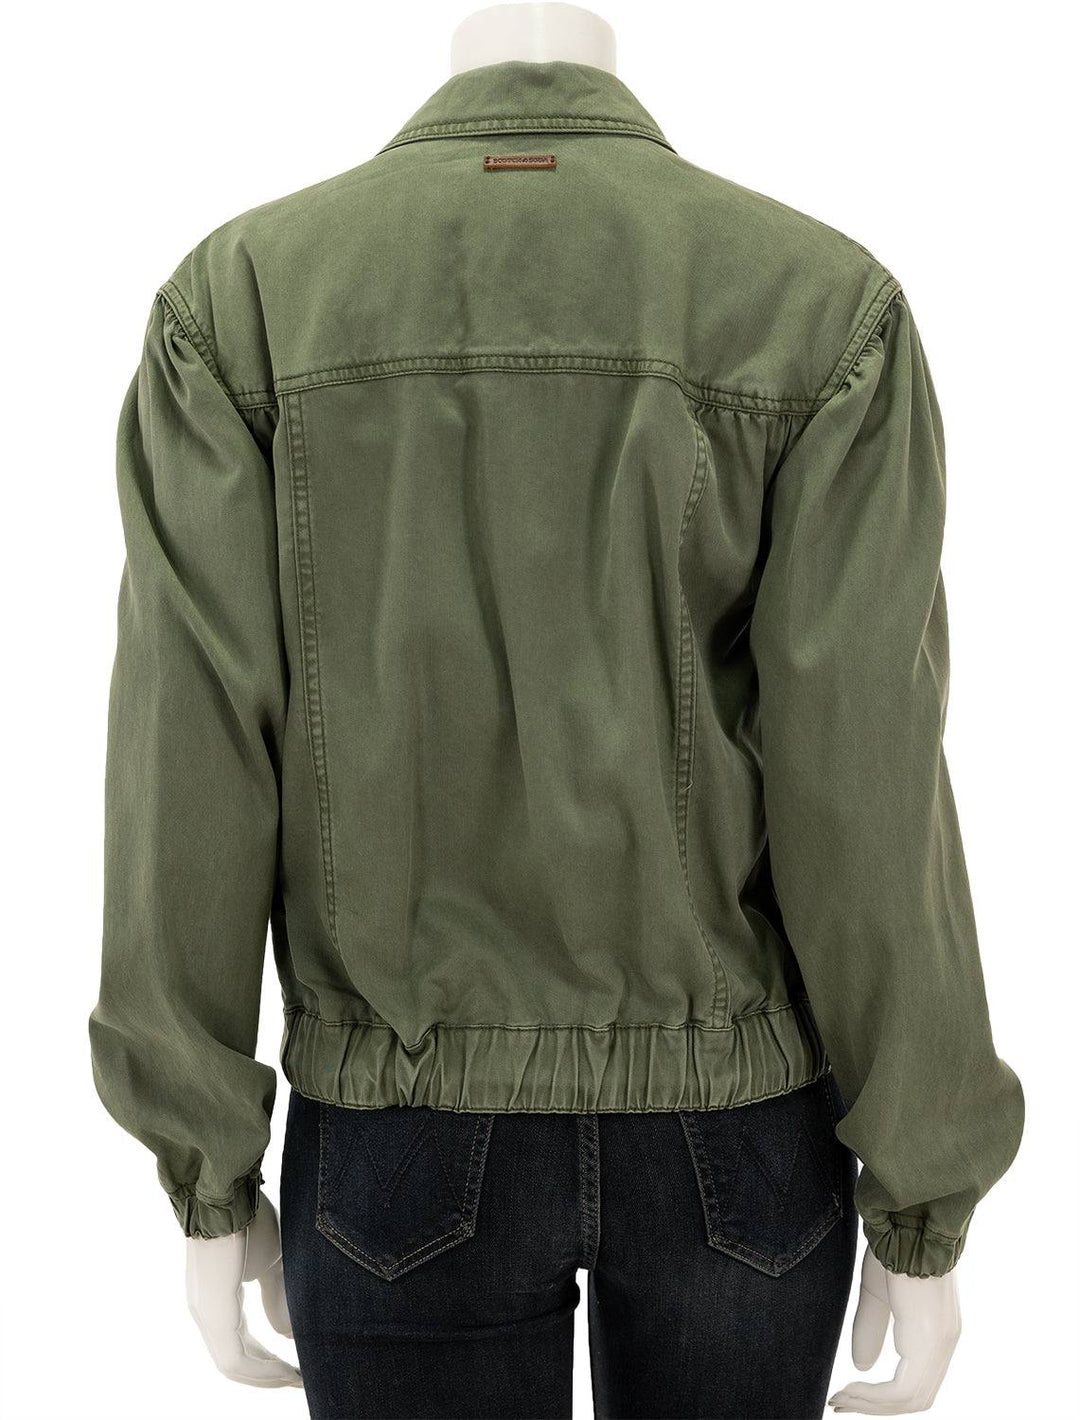 Back view of Scotch & Soda's utility jacket in olive green.